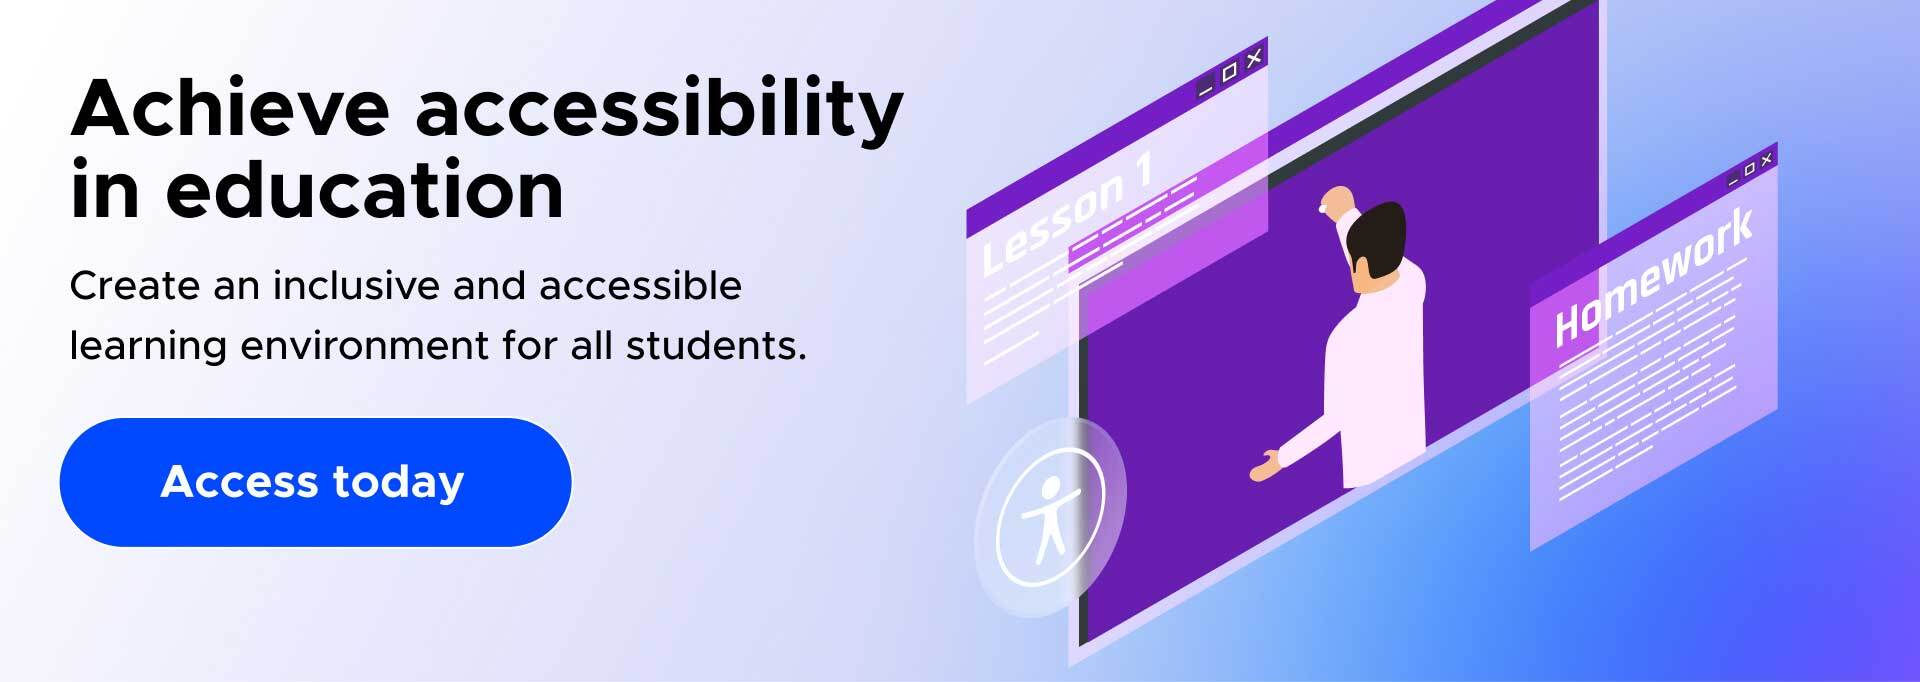 Create an inclusive and accessible learning environment for all students.